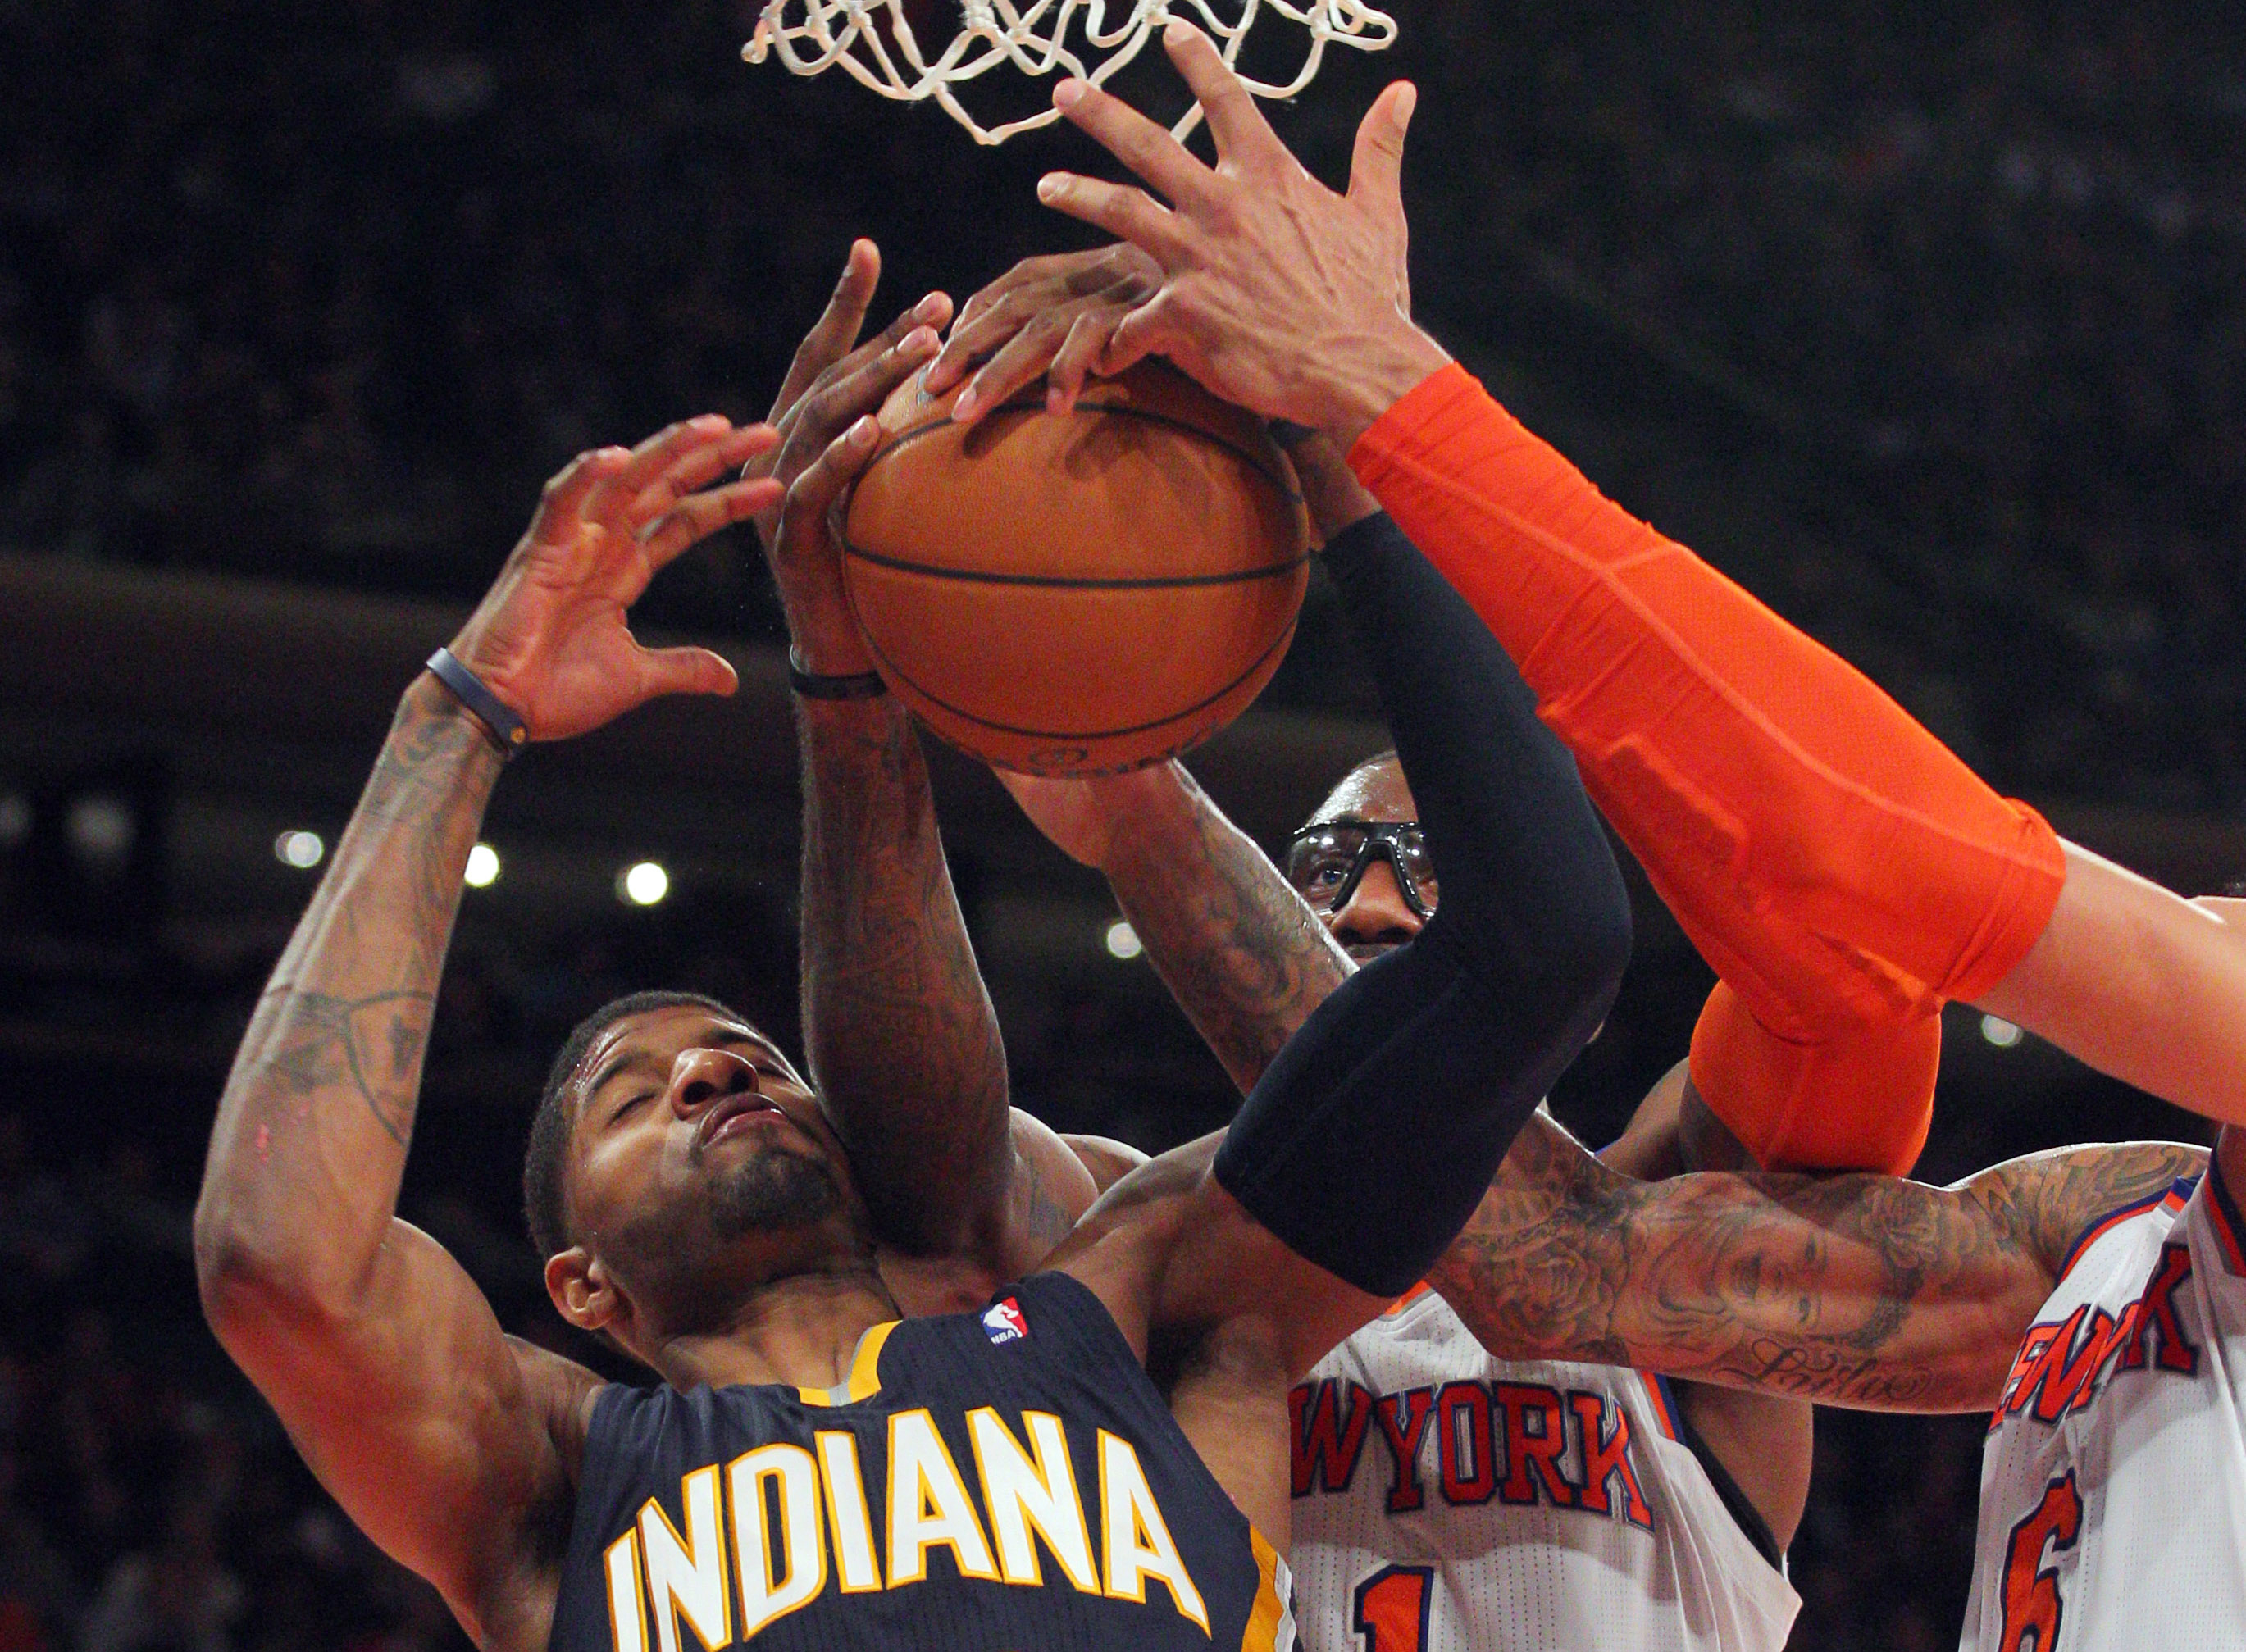 Indiana Pacers small forward Paul George and New York Knicks power forward Amare Stoudemire fight for a rebound in their NBA game at Madison Square Garden. The Knicks defeated the Pacers 92-86. Photo: USA TODAY Sports